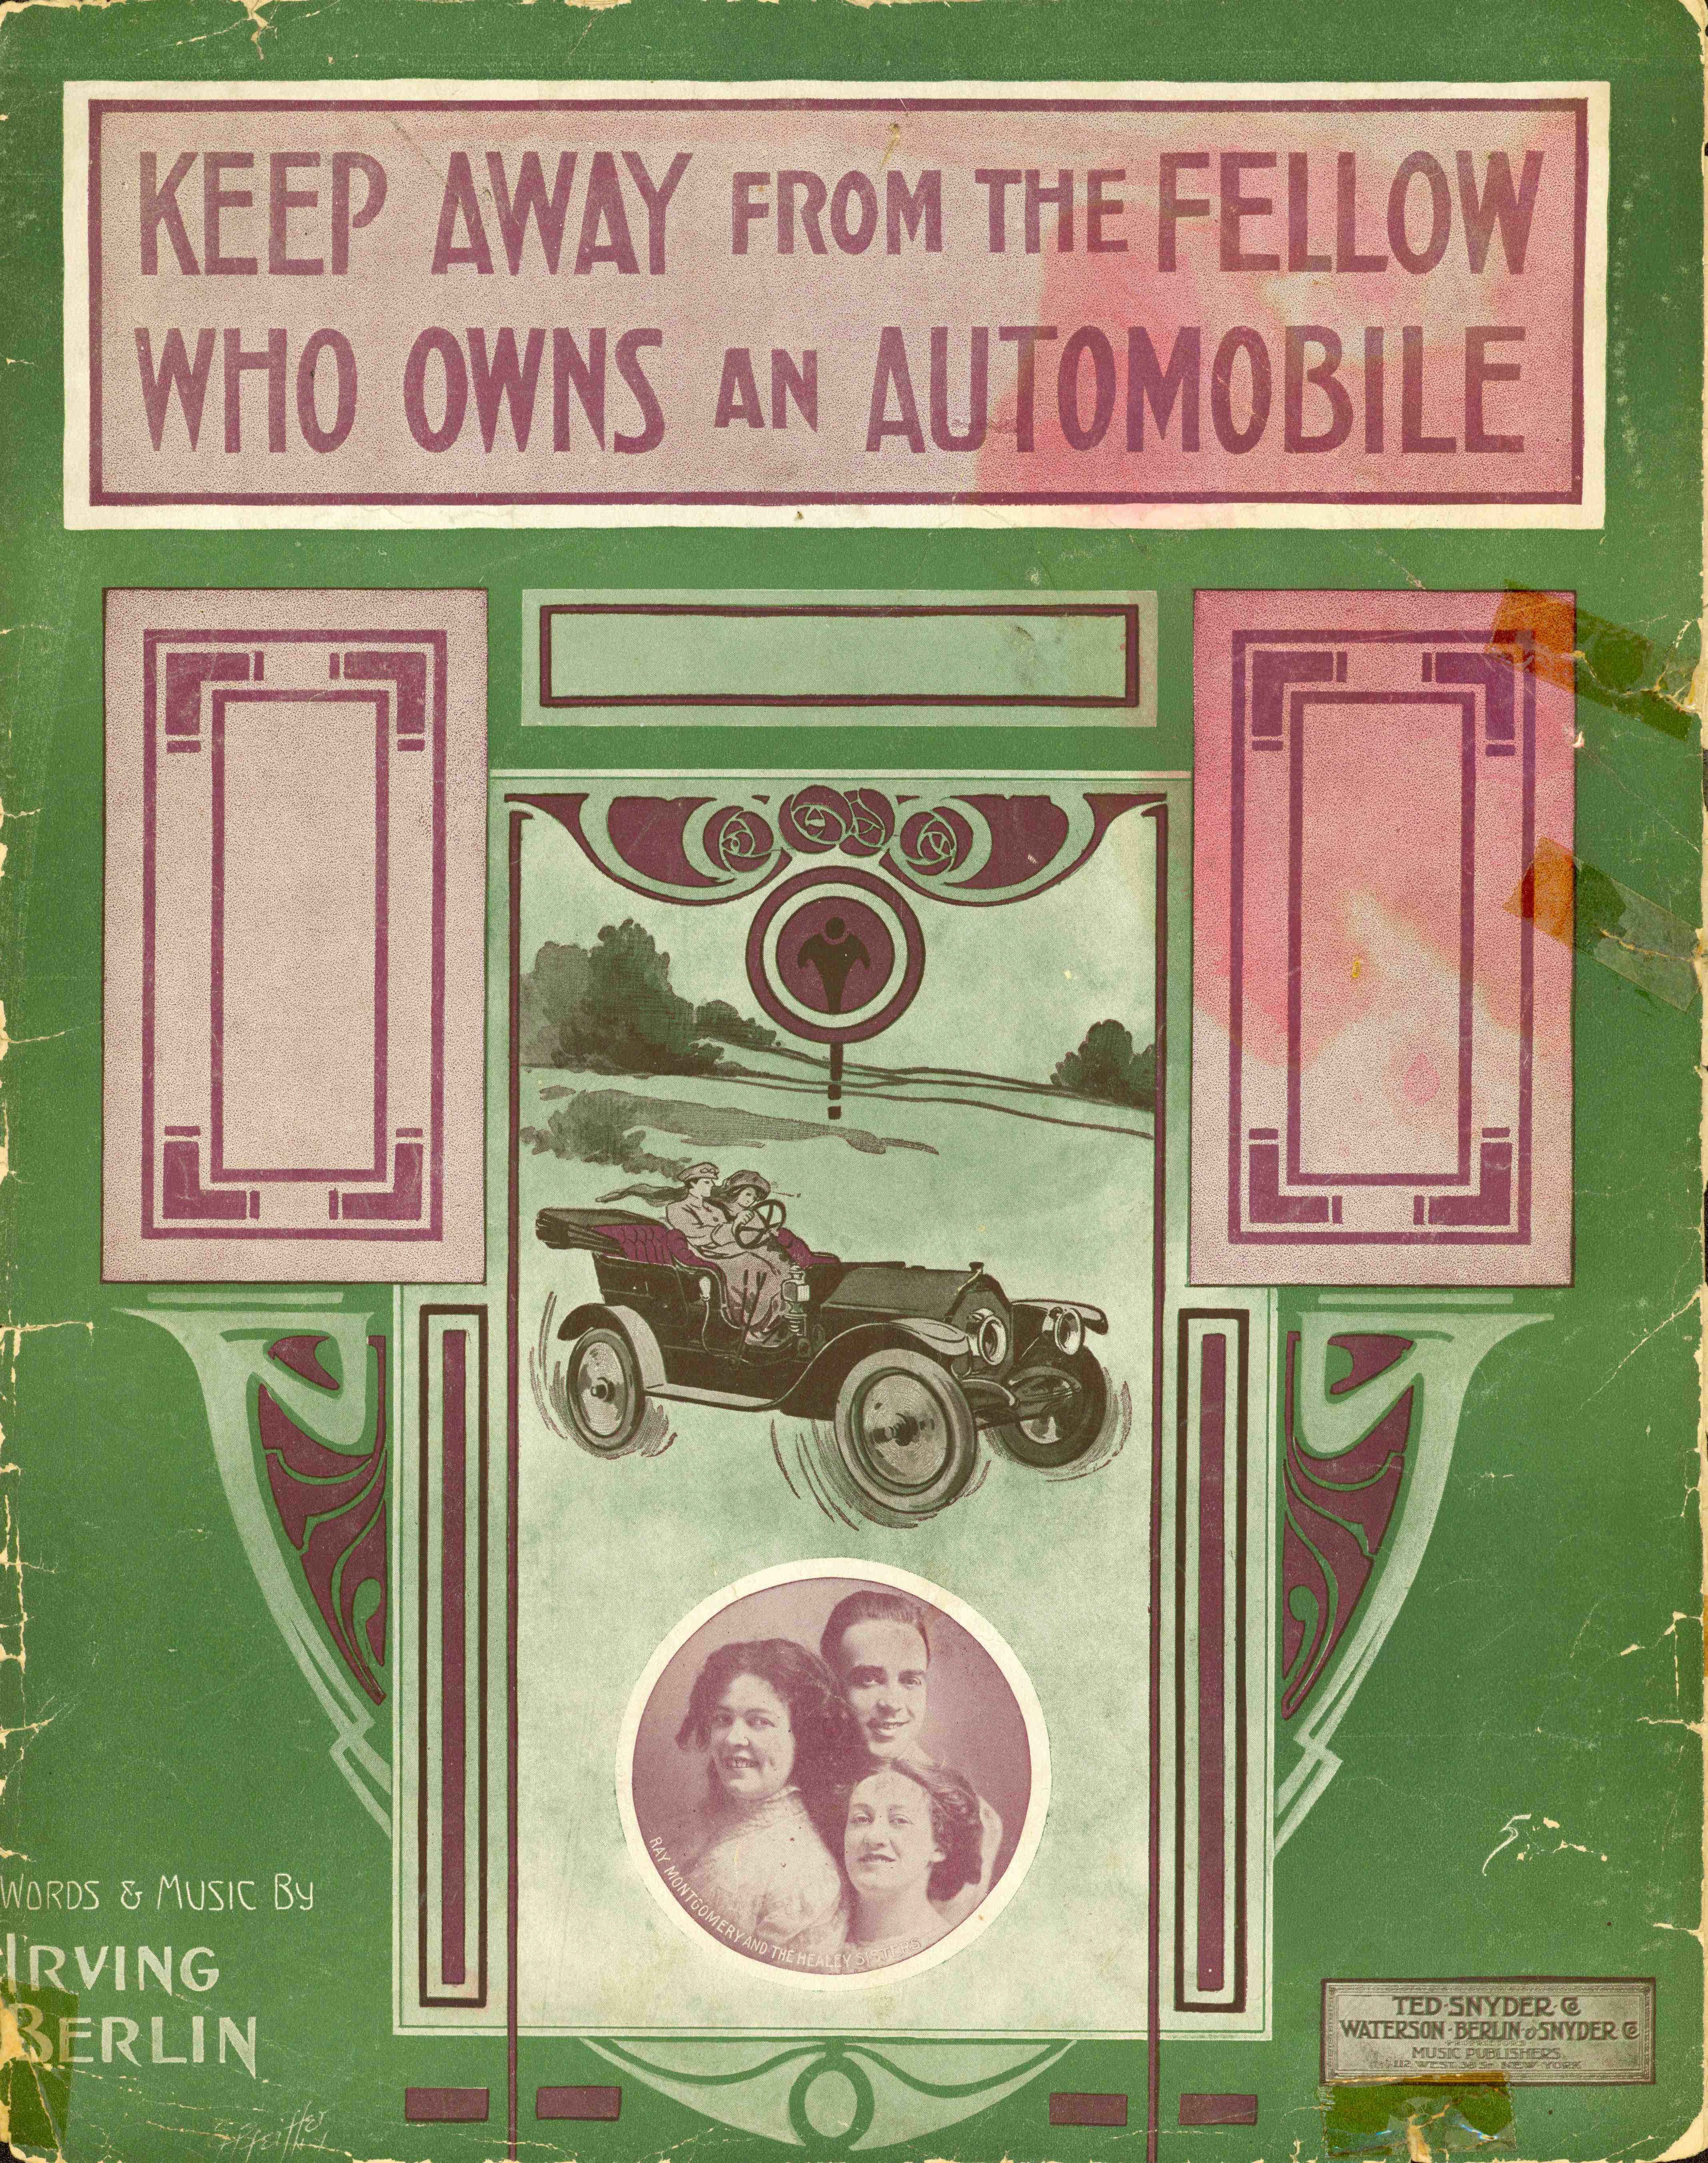 Cover for sheet music titled "Keep Away from the Fellow who owns an Automobile". Cover depicts a ca